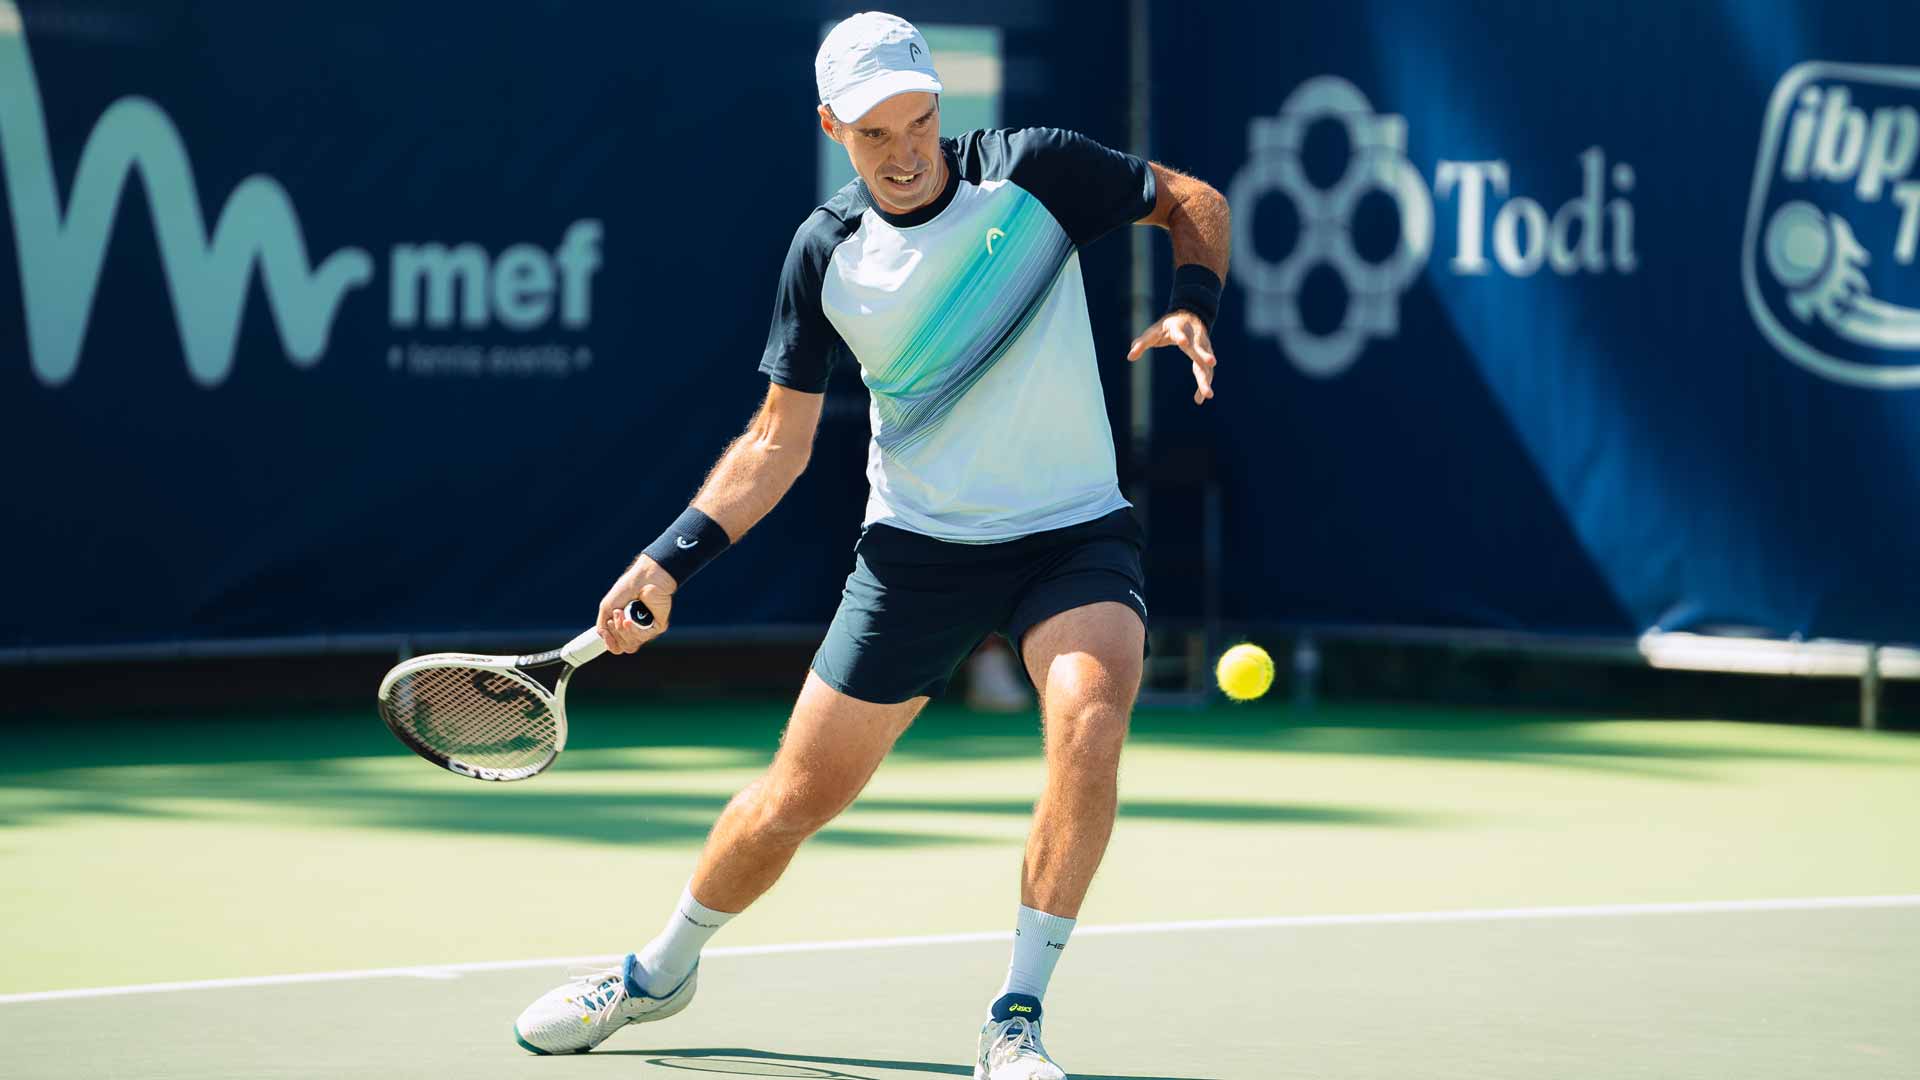 Kukushkin claims second straight Challenger title; Rinderknech wins at home